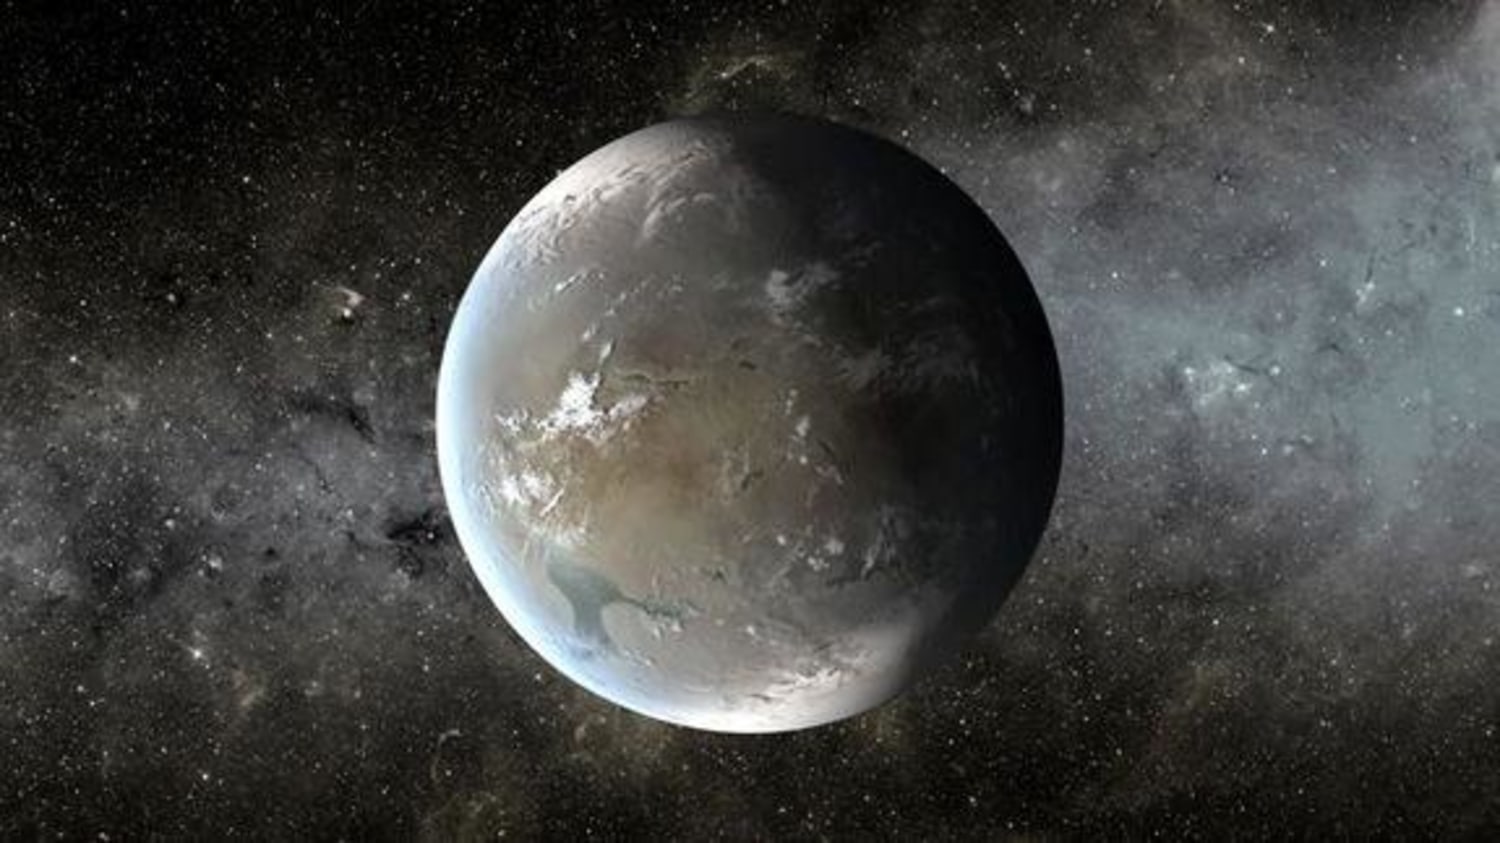 Planets found by Kepler likely bigger than thought